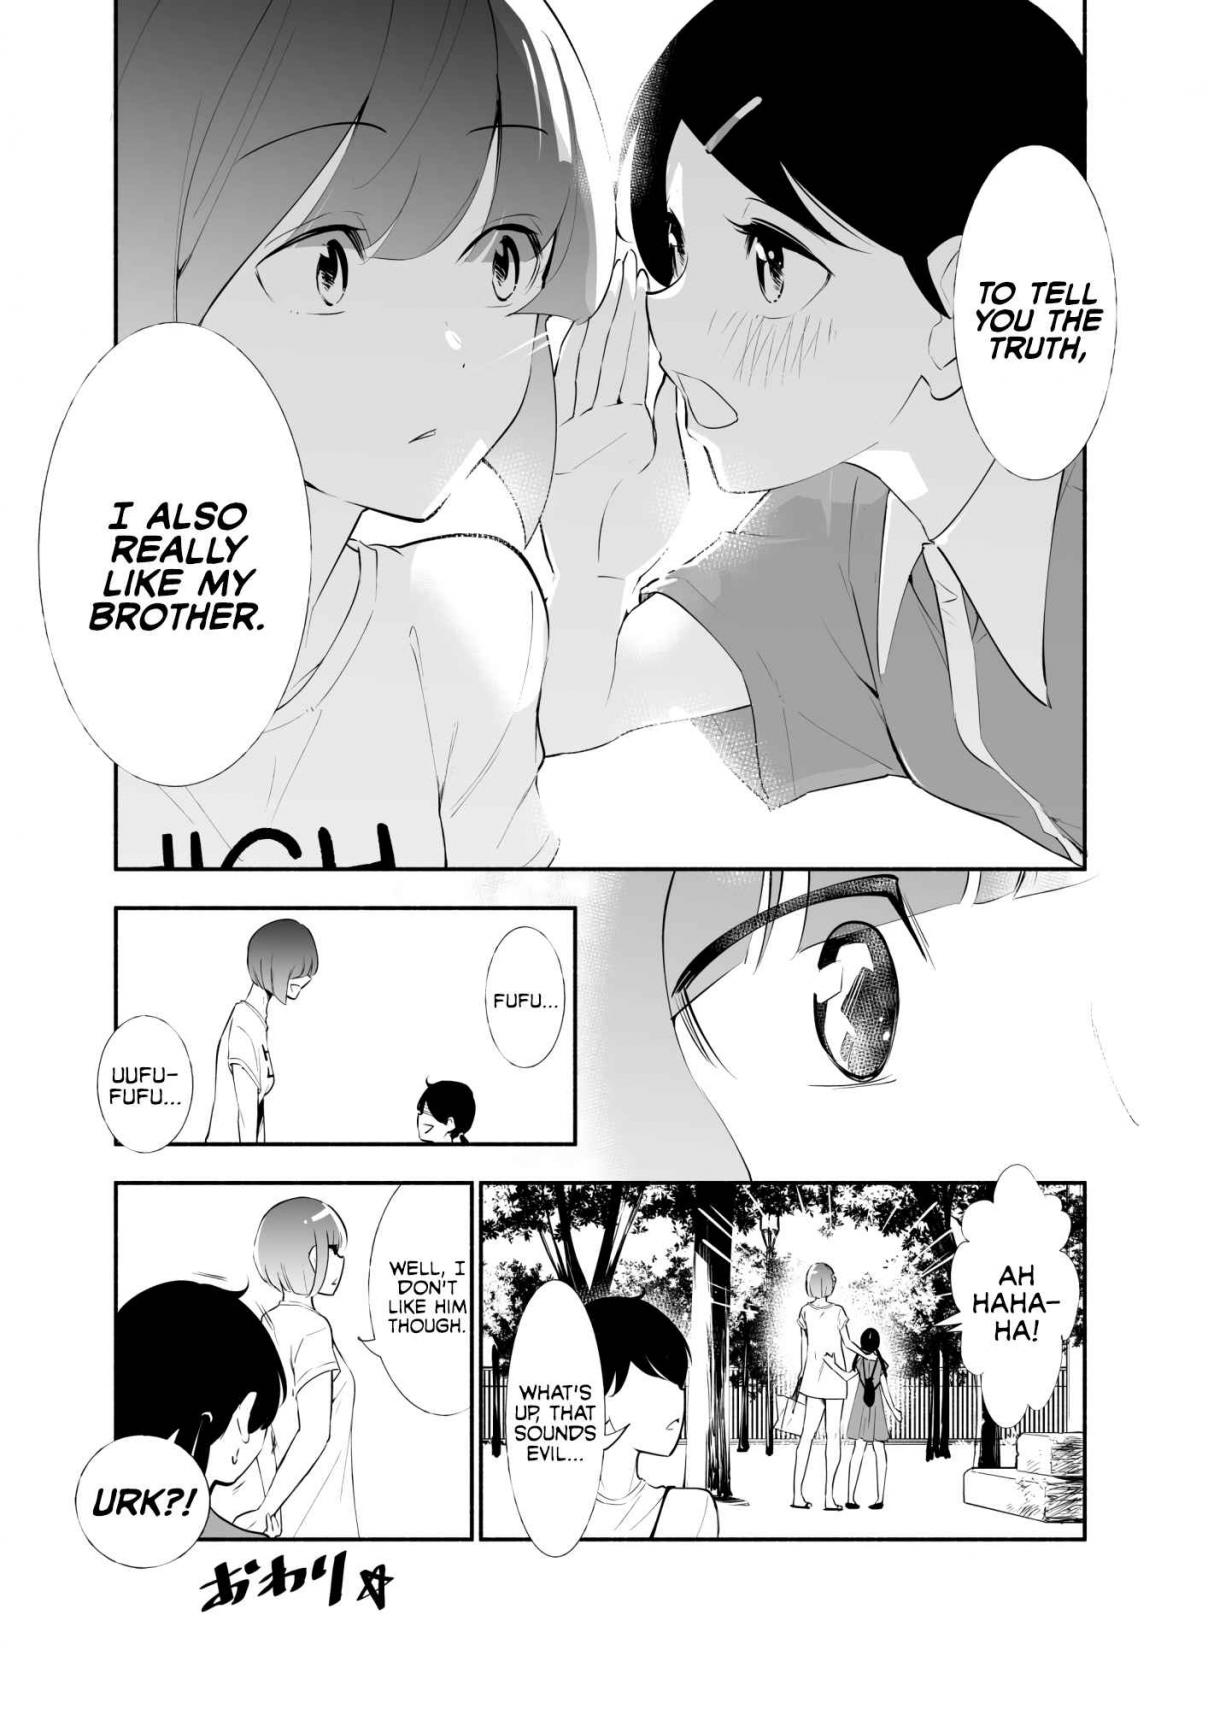 Until the Tall Kouhai (Girl) and the Short Senpai (Boy) Relationship Develops Into Romance Vol. 1 Ch. 6 Like Minded